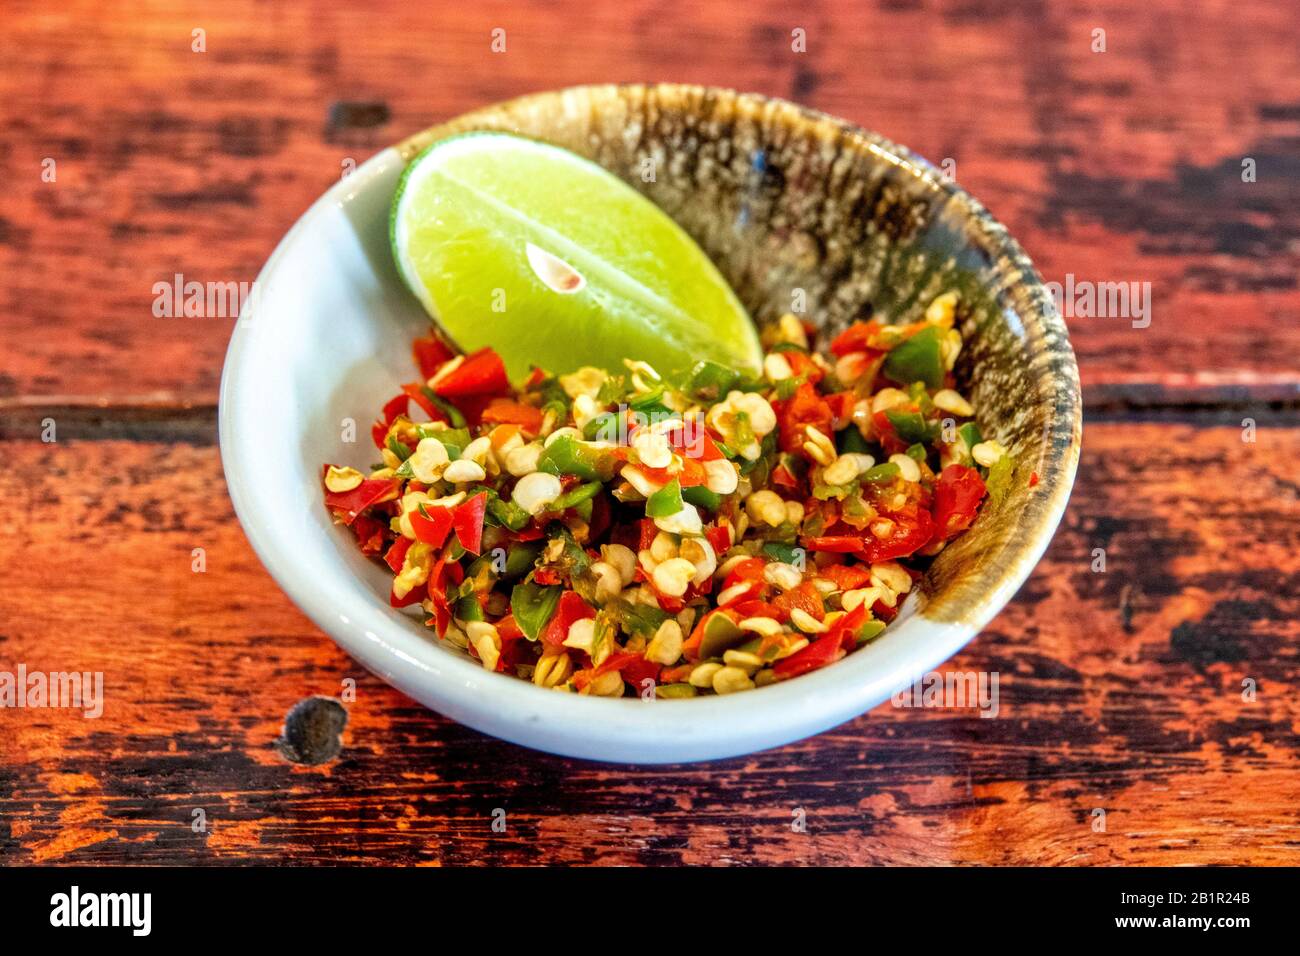 Chili used as a side dish in thai traditional cuisine Stock Photo